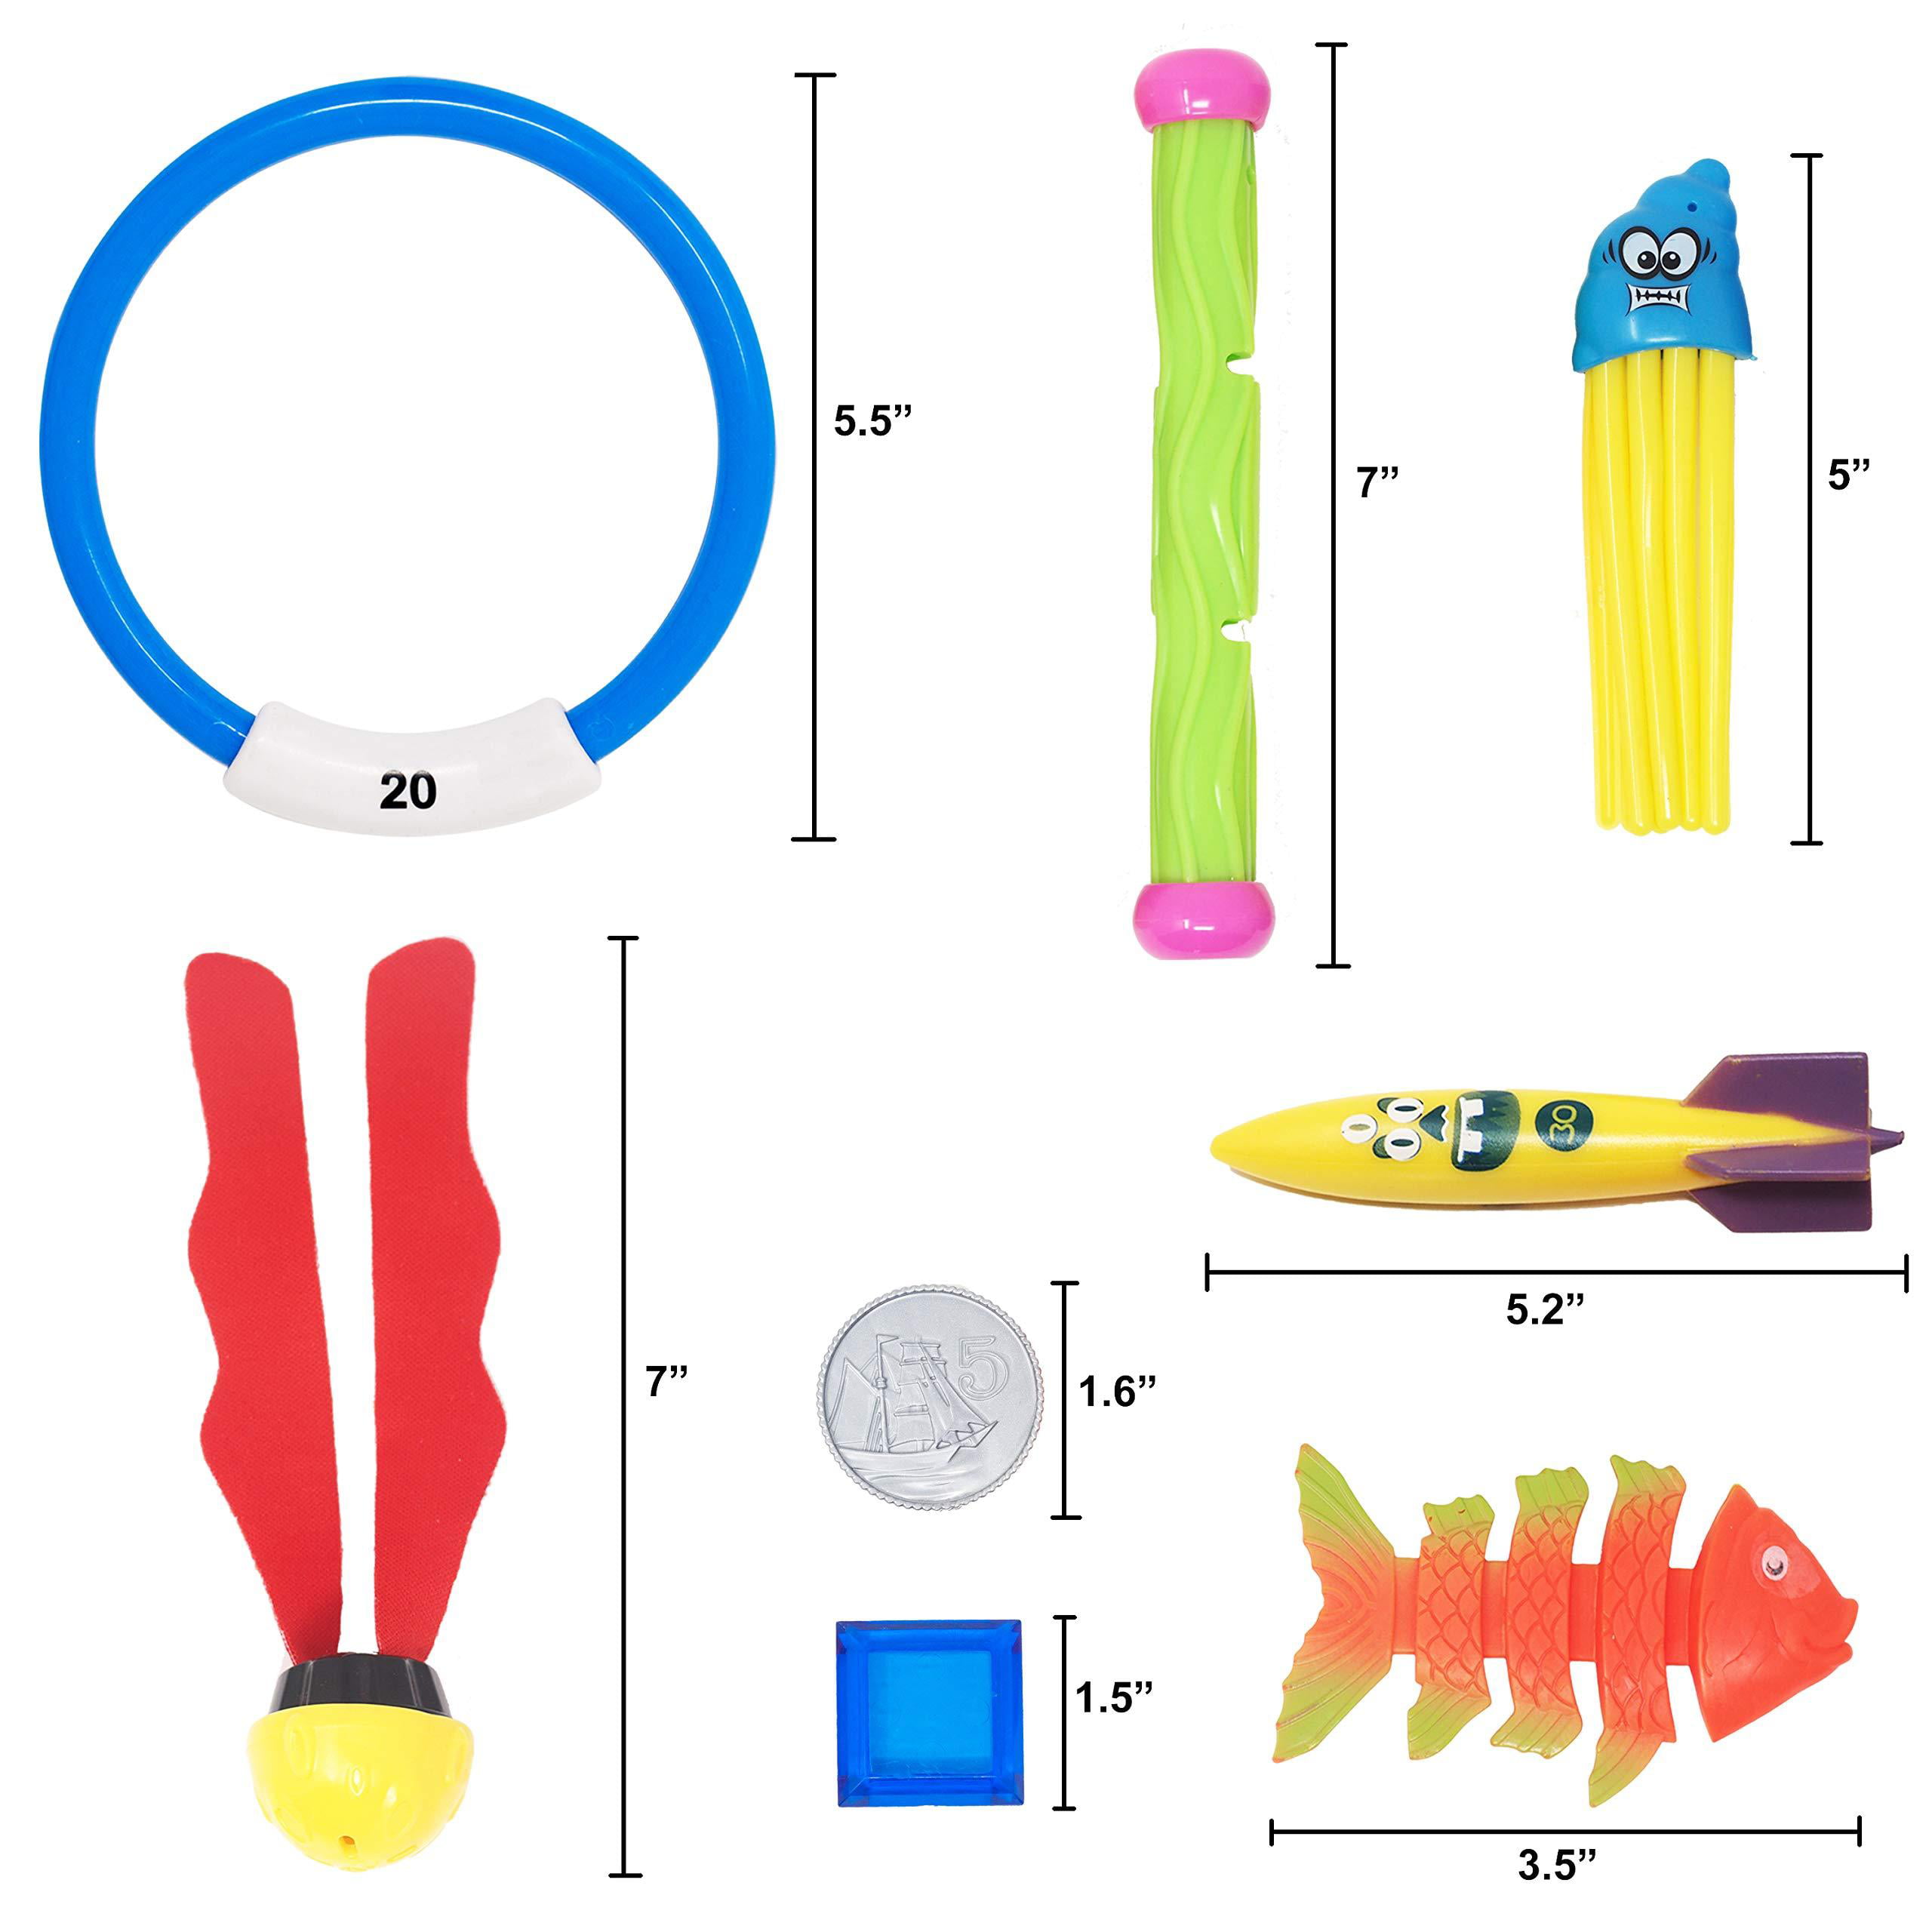 36 PCs Diving Pool Toys Deluxe Set w/ 4 Diving Sticks; 4 Diving Rings; 4 Toypedo Bandits; 12 Pirate Coins & Treasures; 4 Stringy Octopus; 4 Fish Toys; 4 Toy Balls for Kids Swimming Training Game 